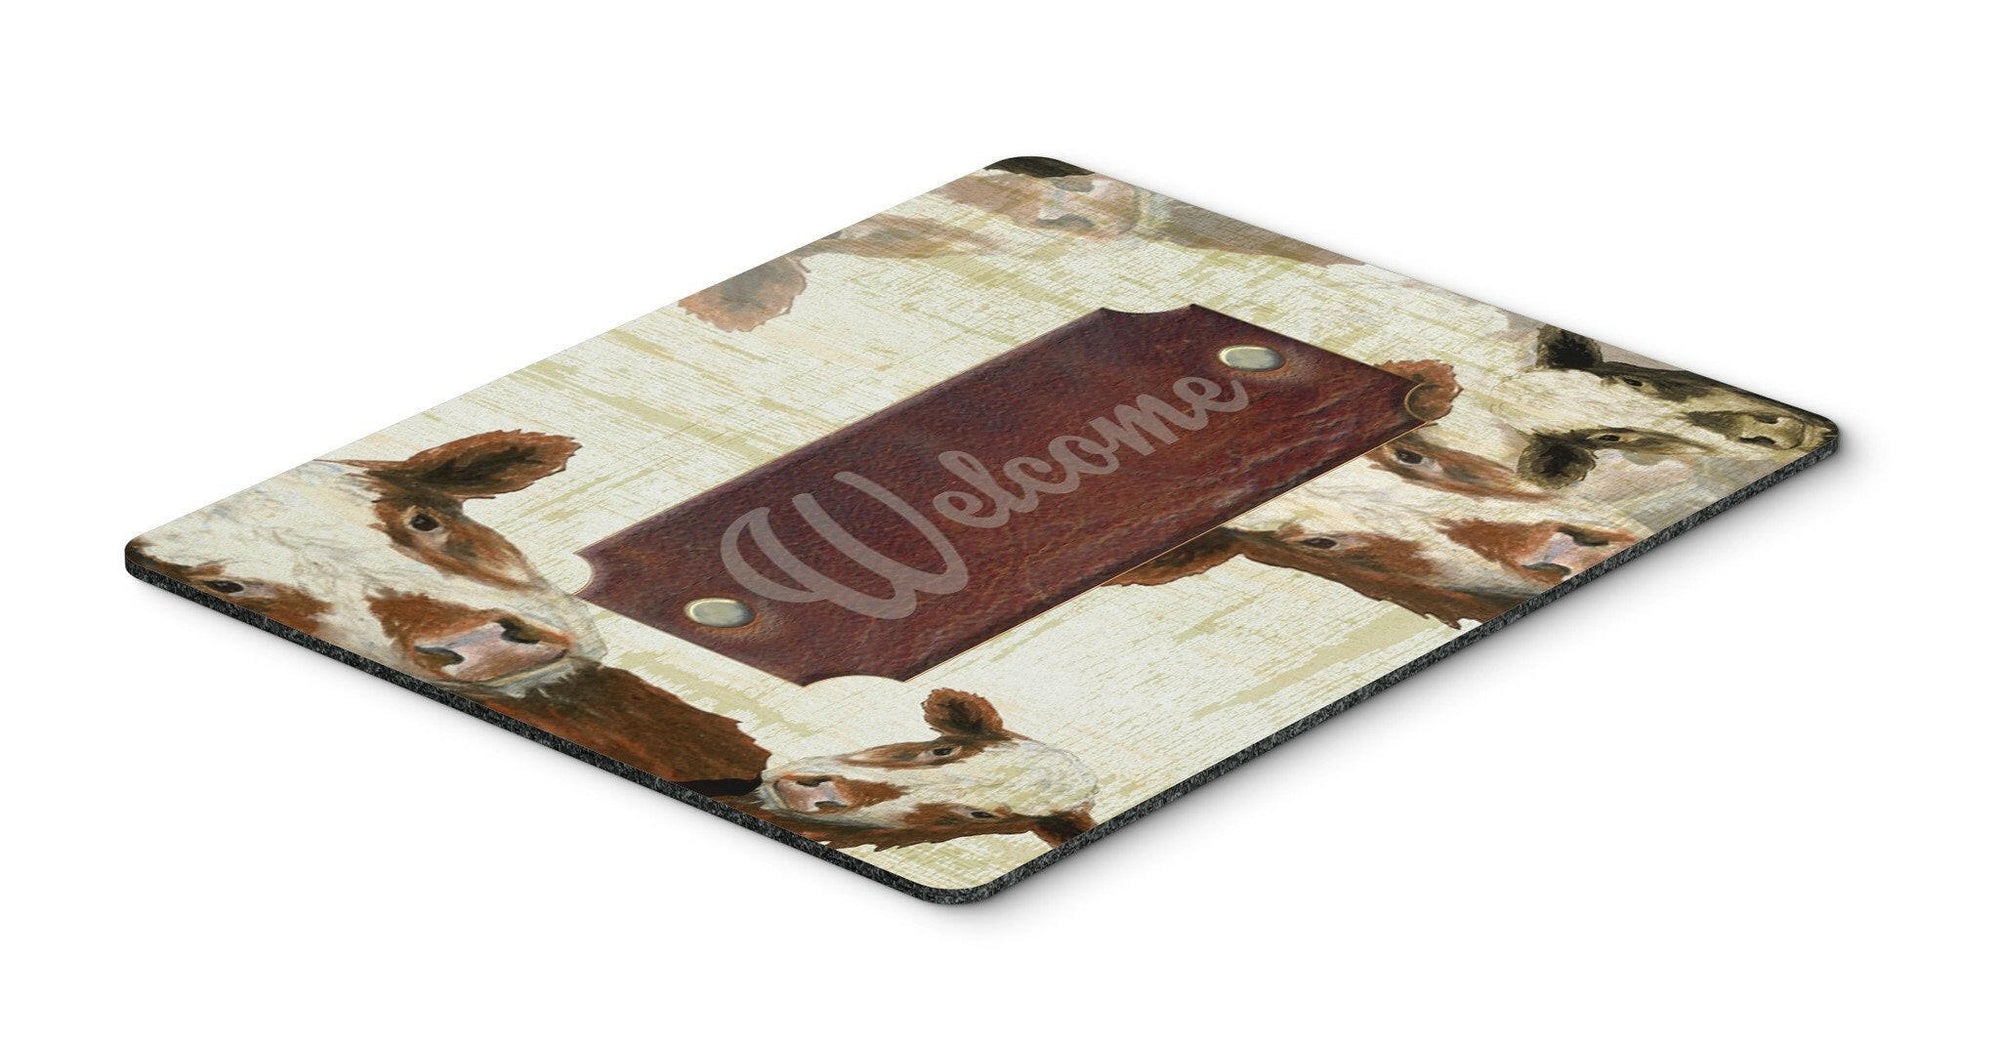 Welcome cow Mouse Pad, Hot Pad or Trivet SB3065MP by Caroline's Treasures